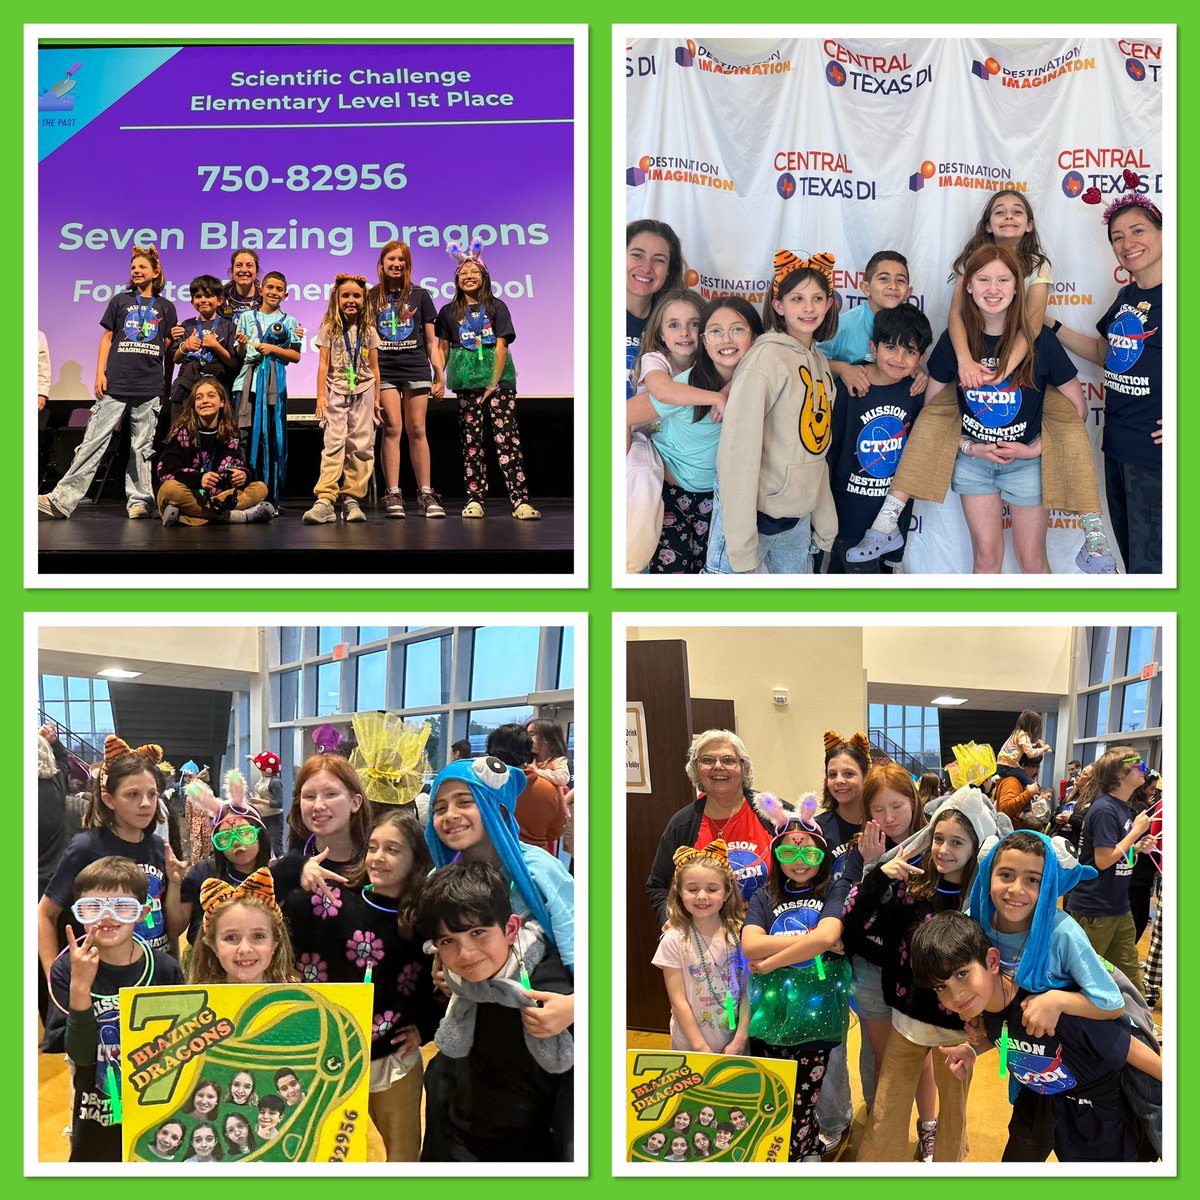 Our @NISDForester DI team did it again!! We are going to STATE @WeAreTexasDI and they rocked at the regional! Awesome job 7 Blazing Dragons! @IDOtorunament..@NISD